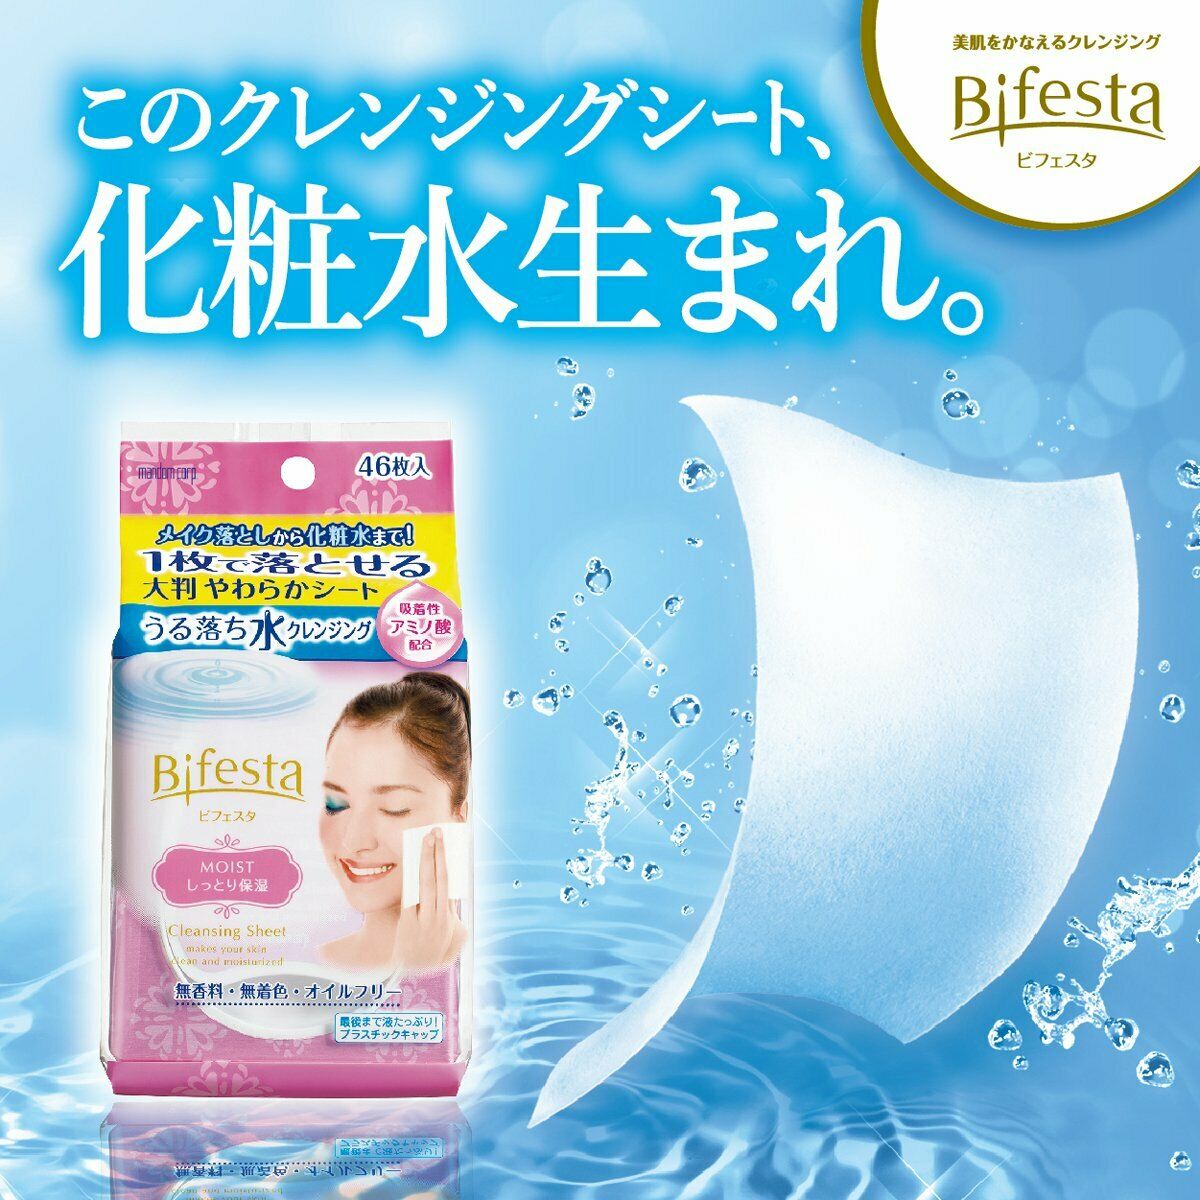 
                  
                    BIFESTA Makeup Remover Cleansing Wipes Moist (Pink) 46 Sheets
                  
                